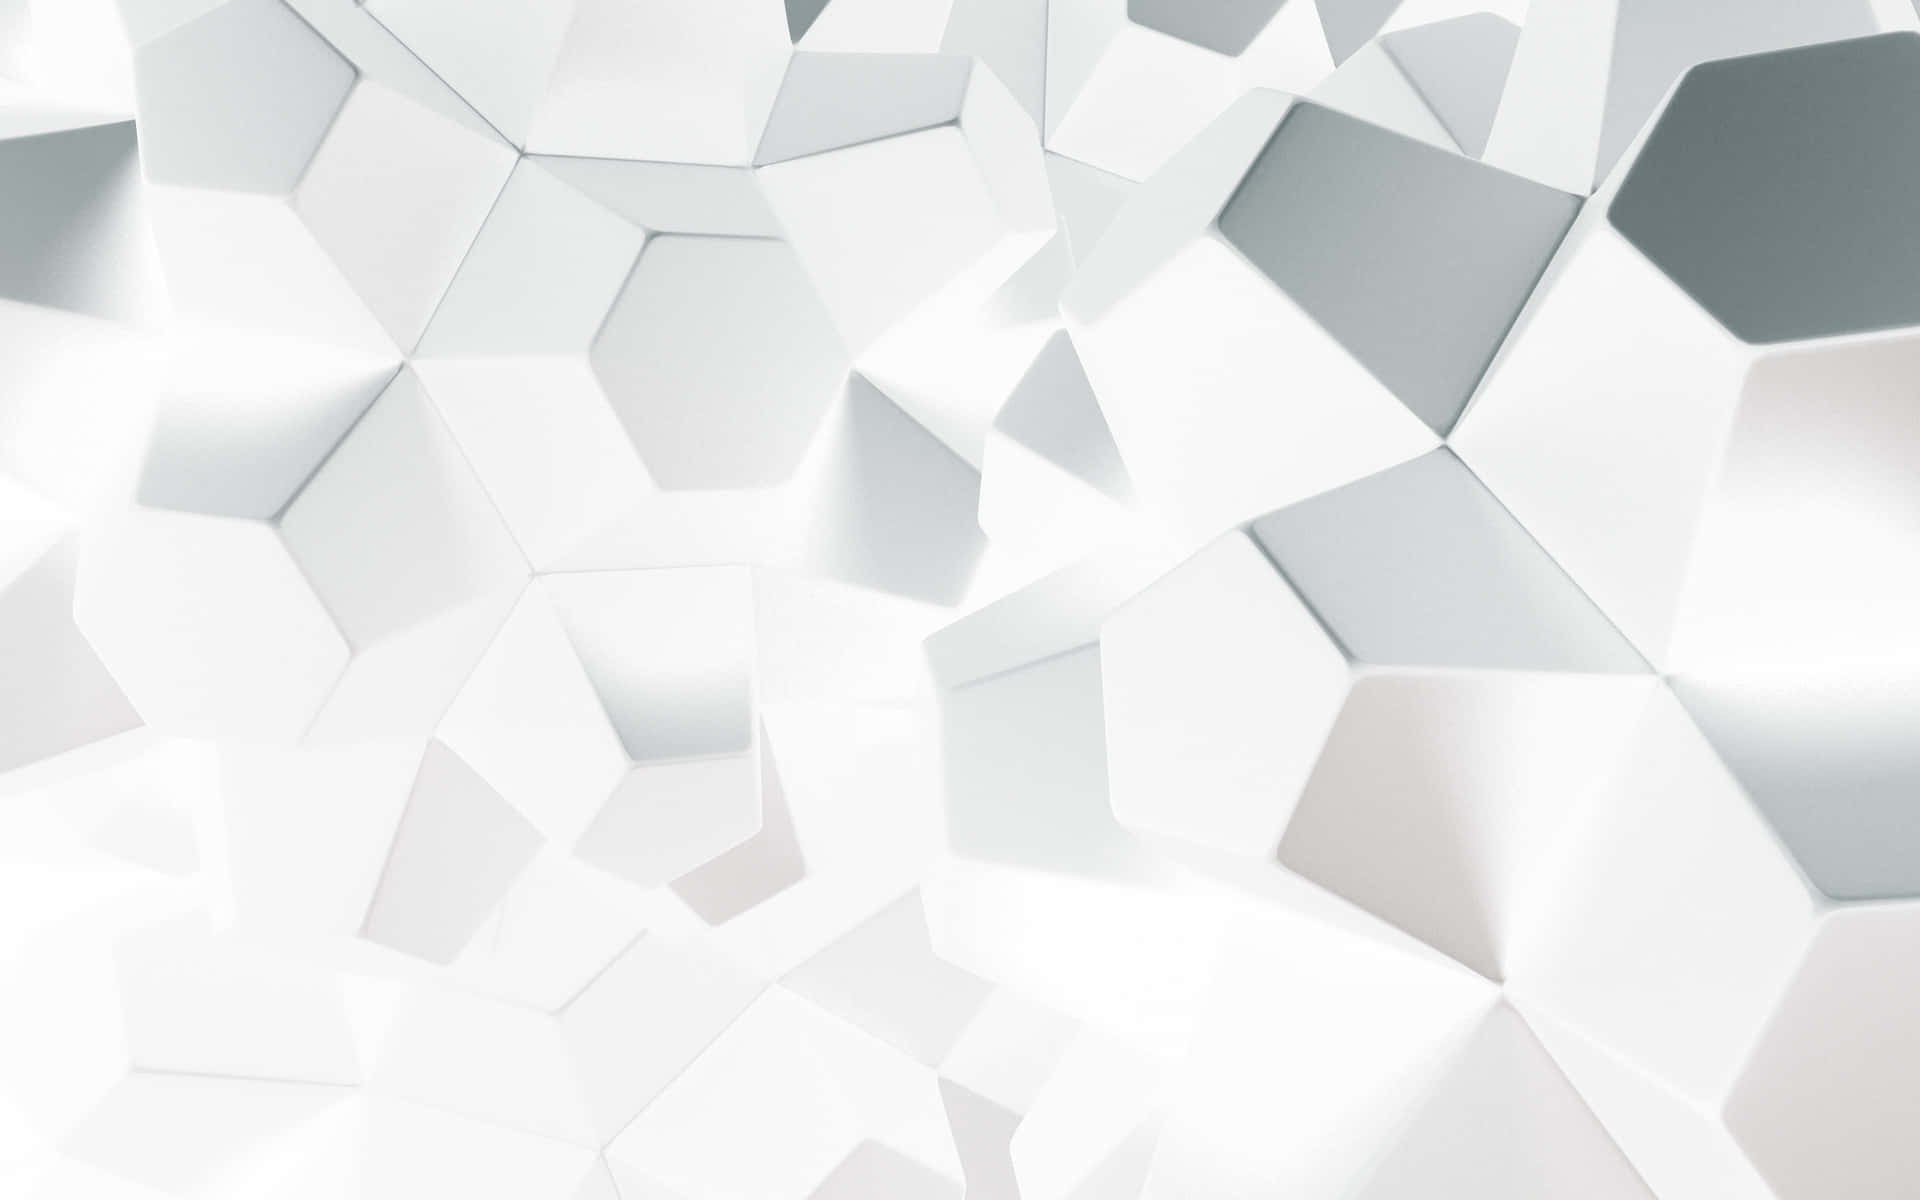 White Abstract Geometric Background With White Cubes